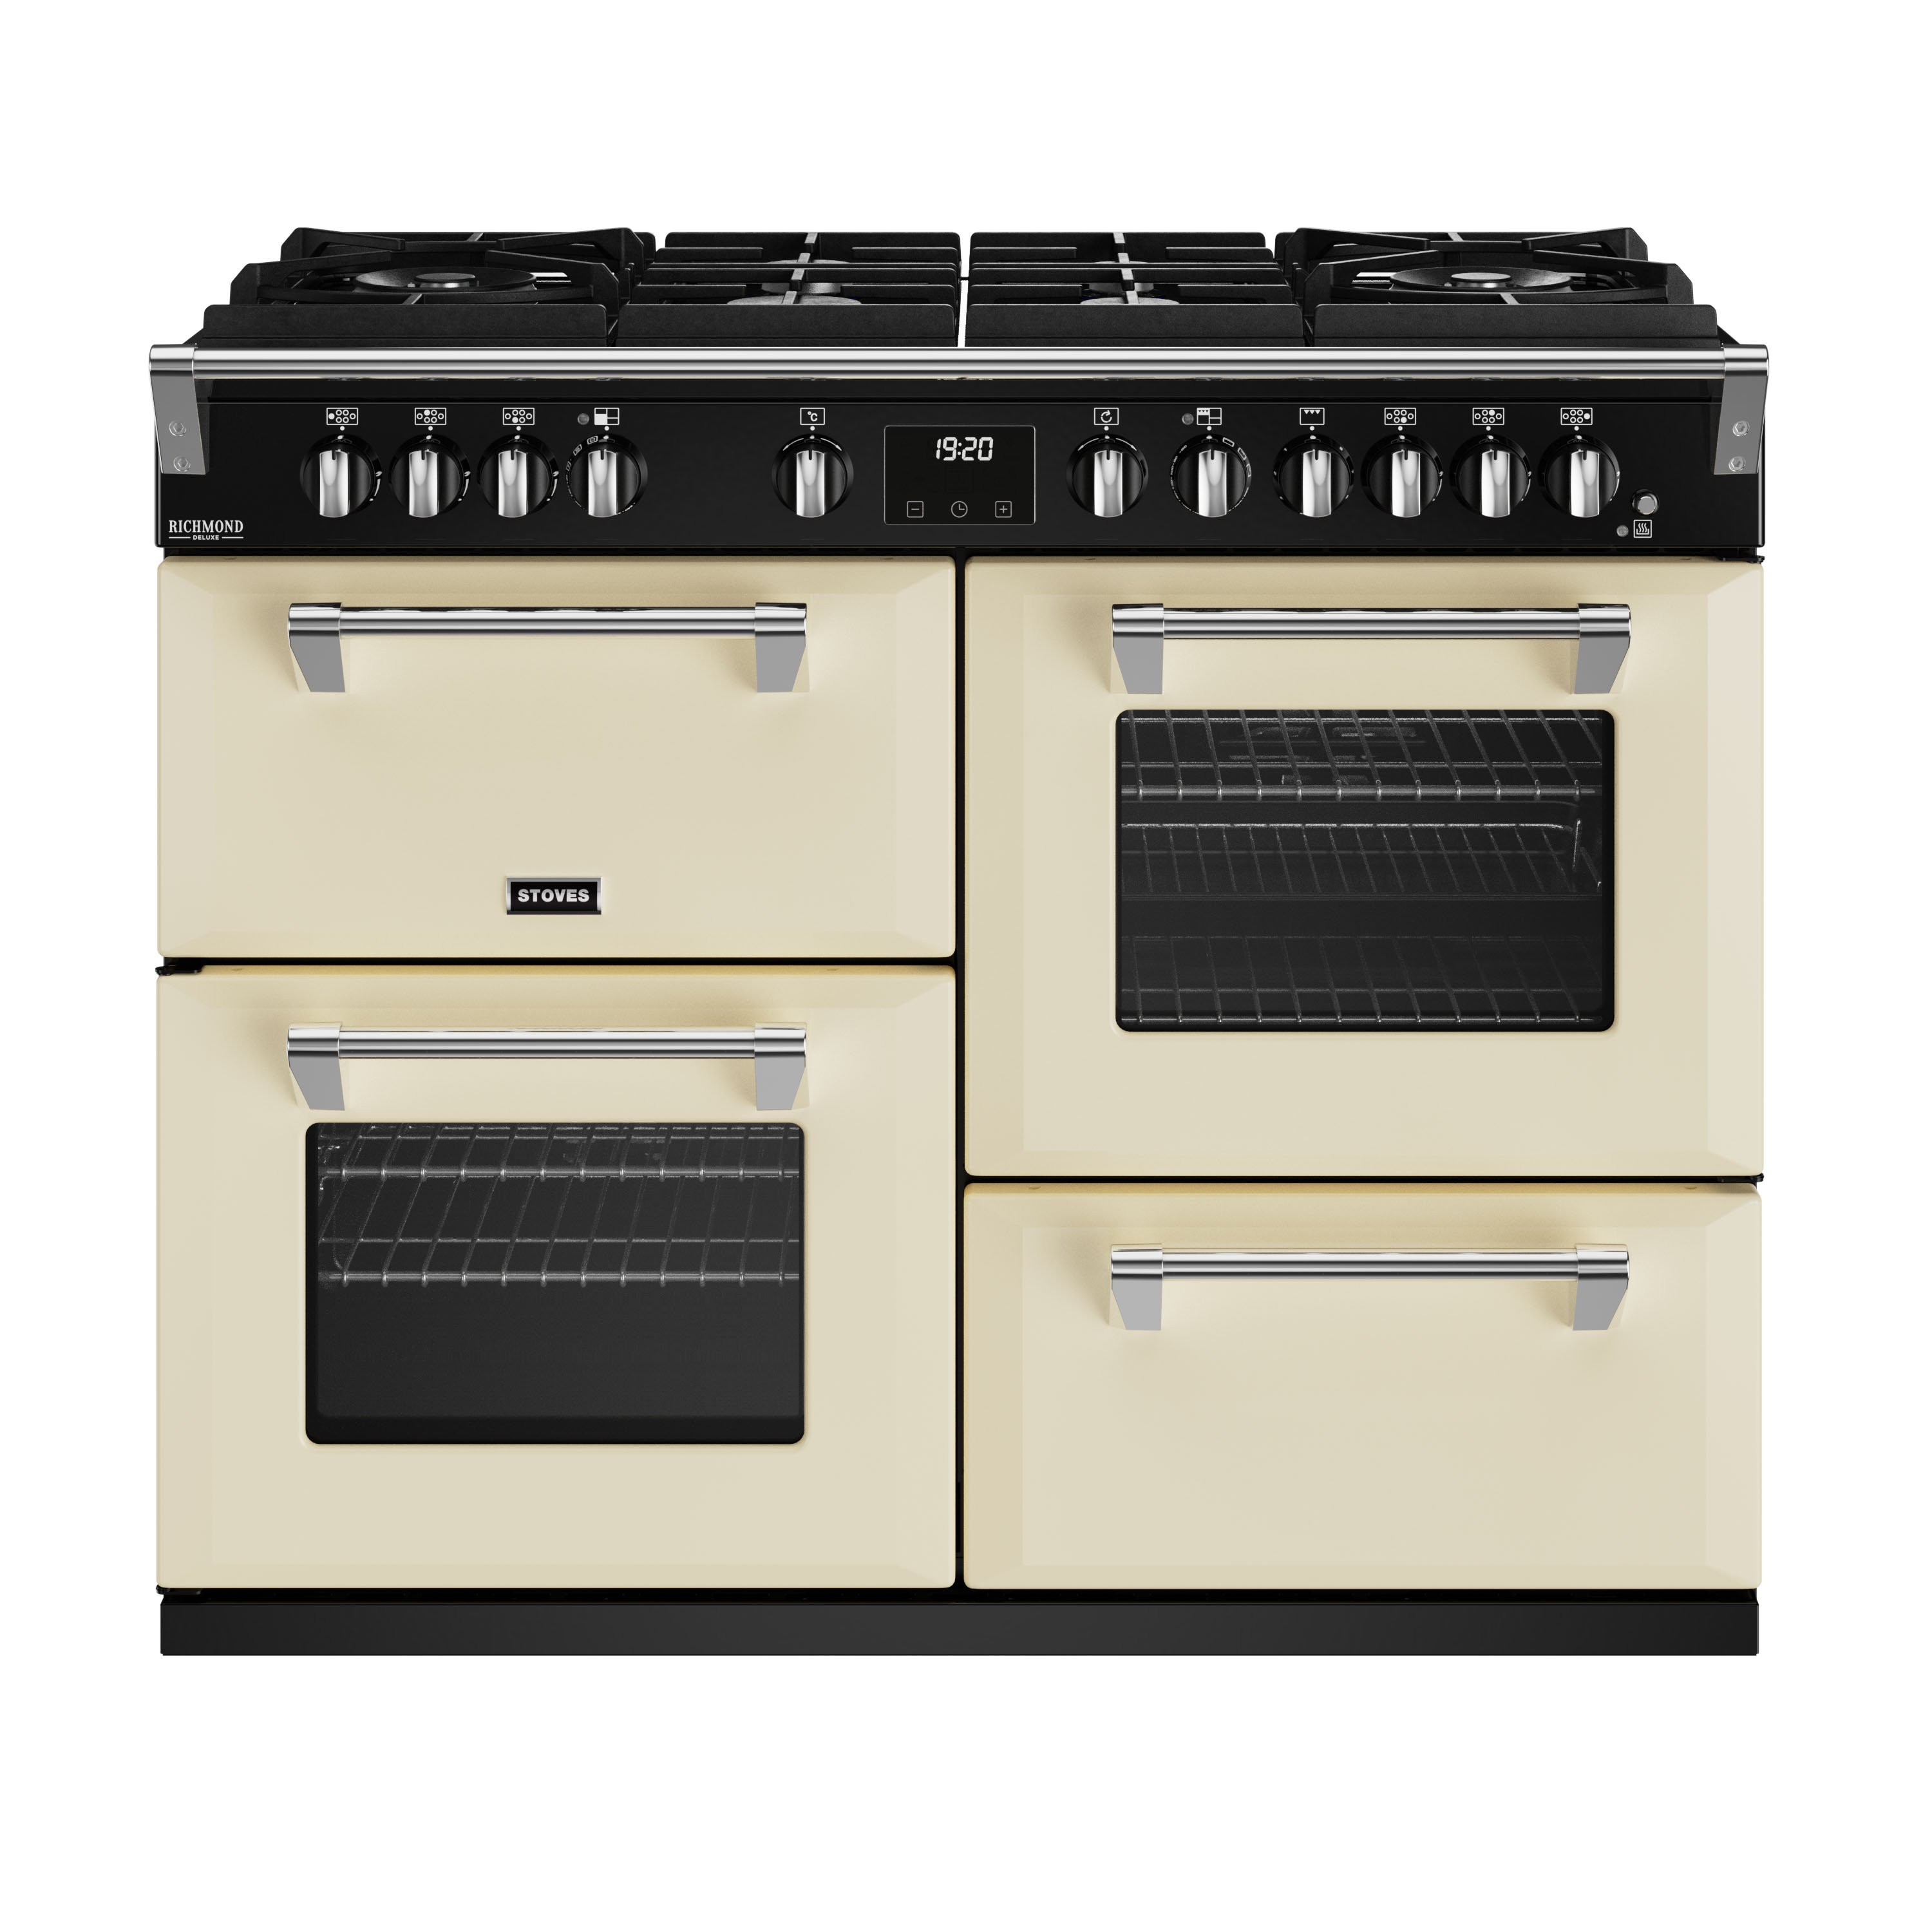 110cm dual fuel range cooker with a 6 burner Gas-Through-Glass hob, conventional oven & grill, multifunction main oven with TrueTemp digital thermostat, fanned second oven and dedicated slow cook oven